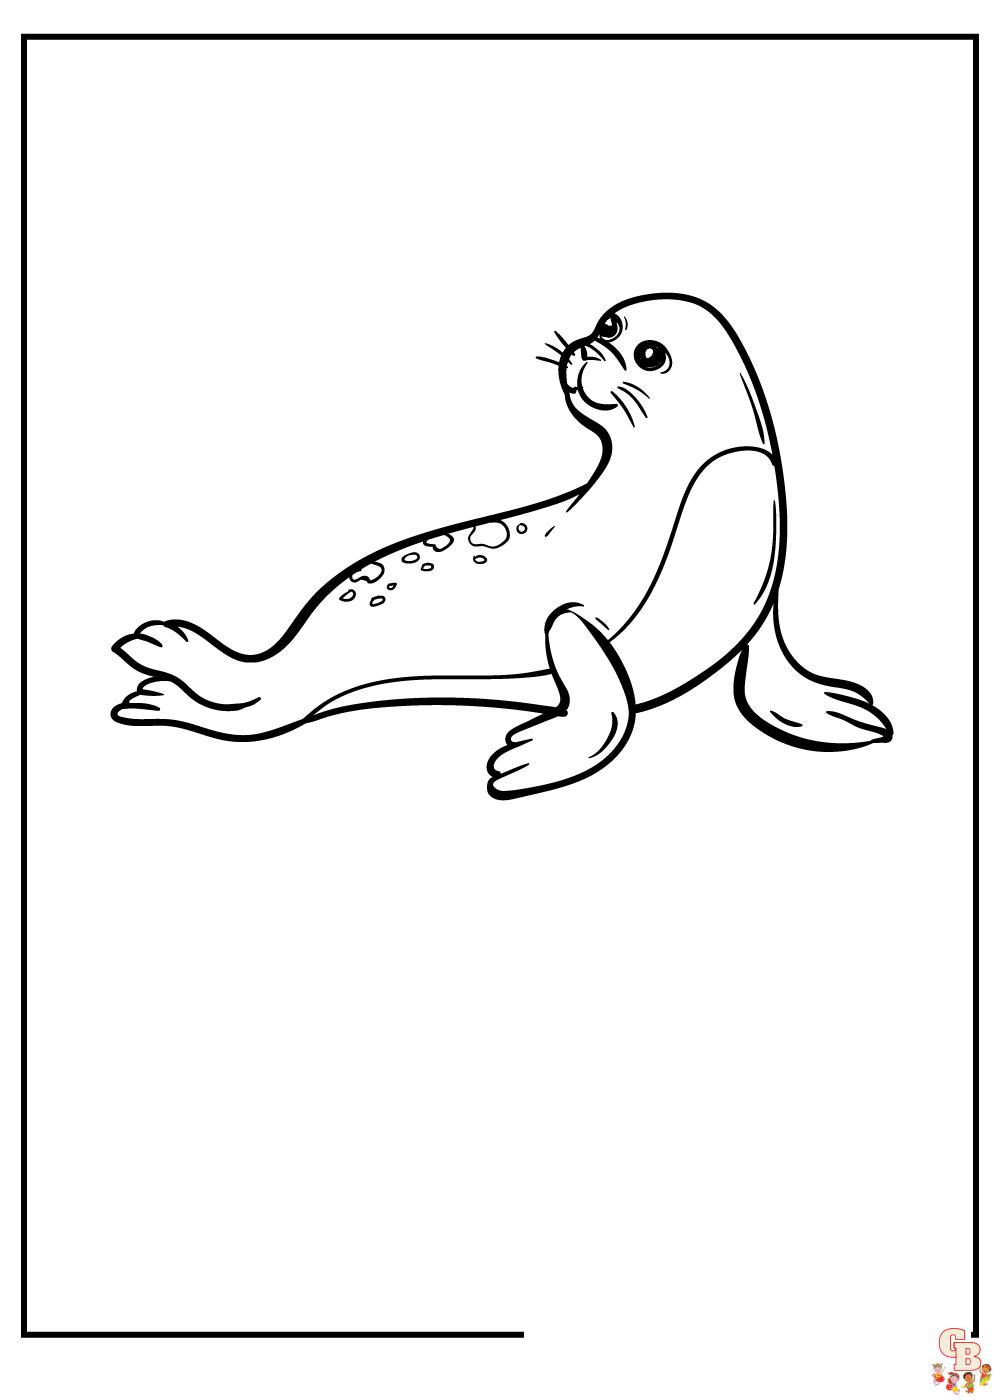 Seal Coloring Pages easy